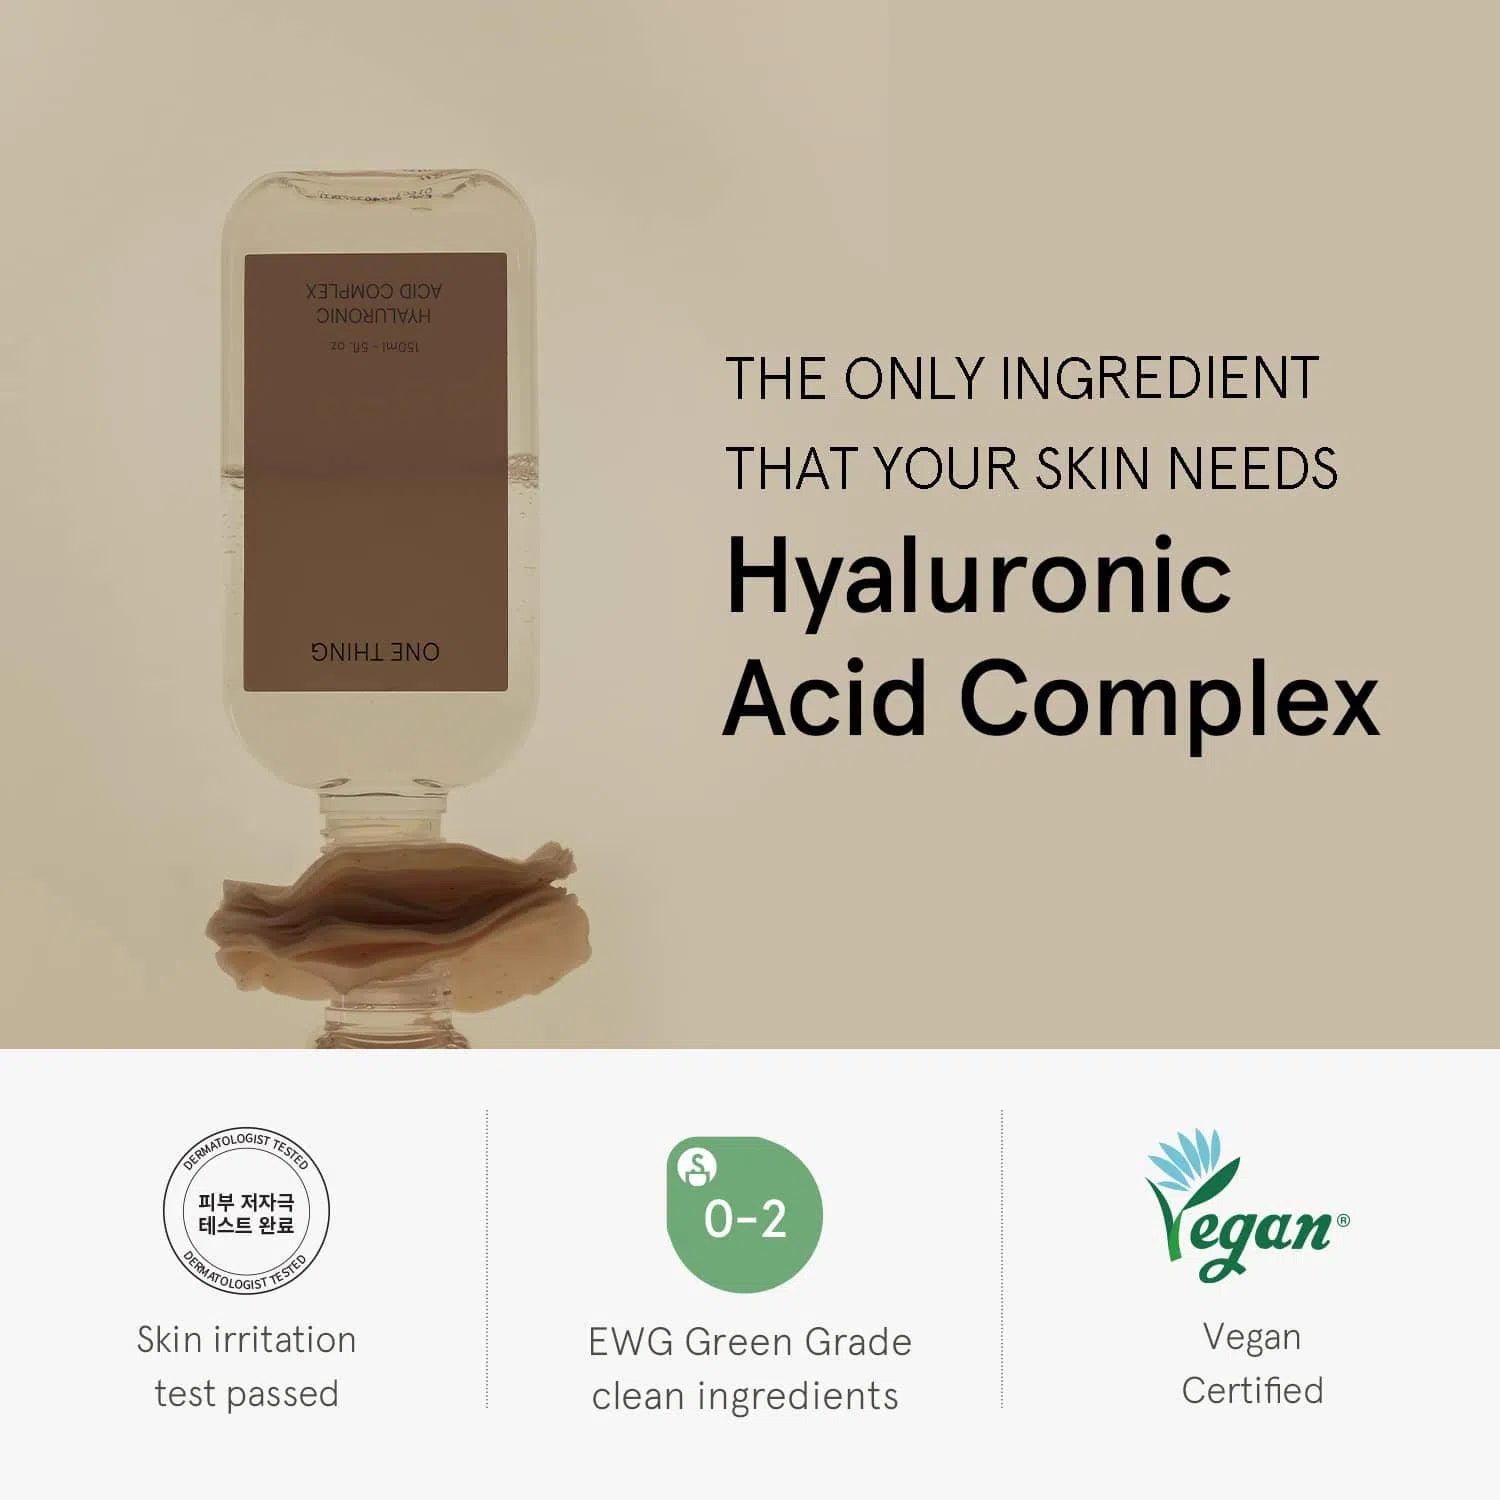 One Thing Hyaluronic Acid Complex Essence